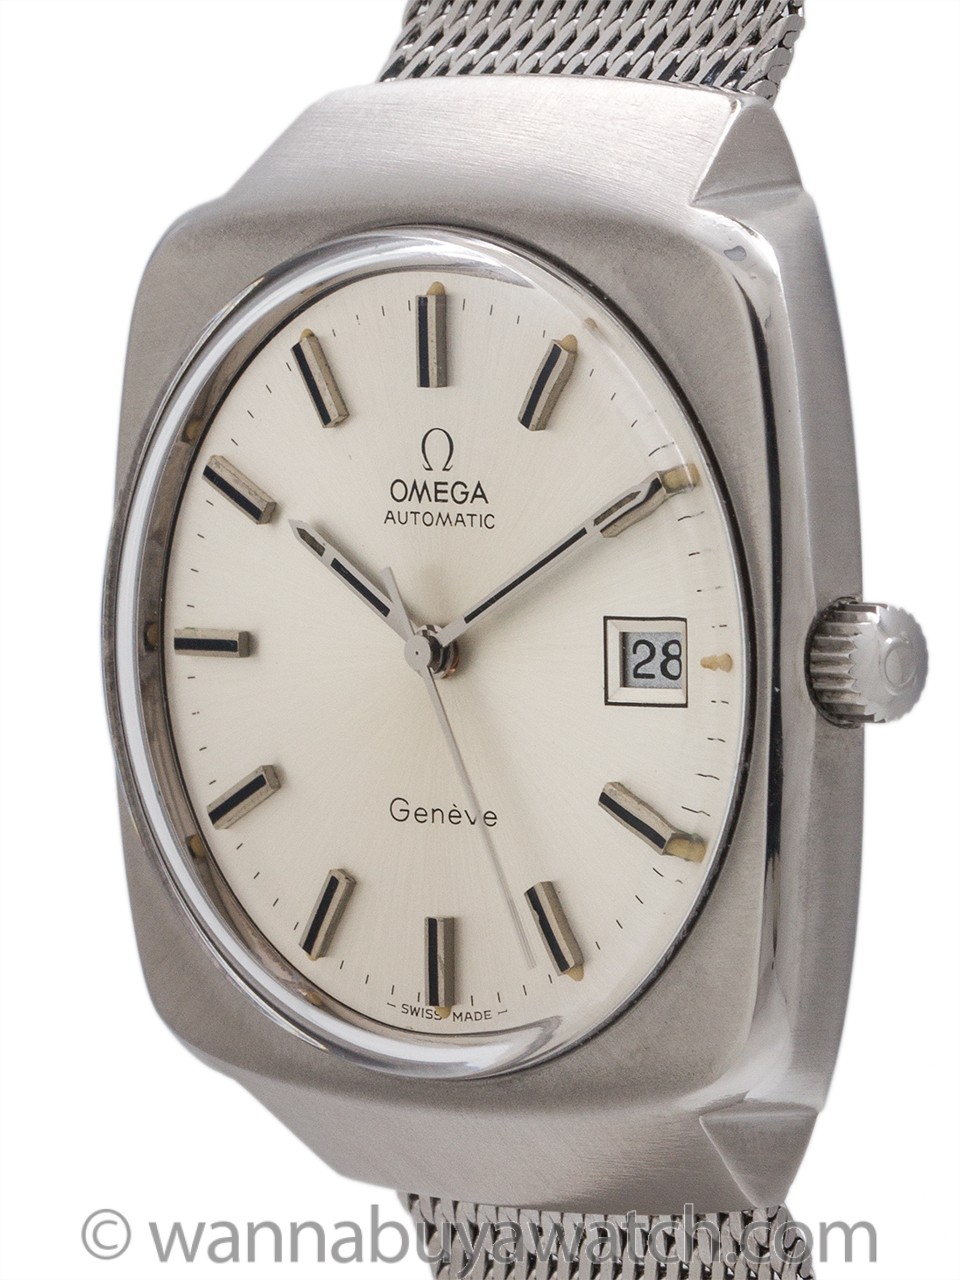 Omega Automatic Deville Stainless Steel circa 1973 – Wanna Buy A Watch?